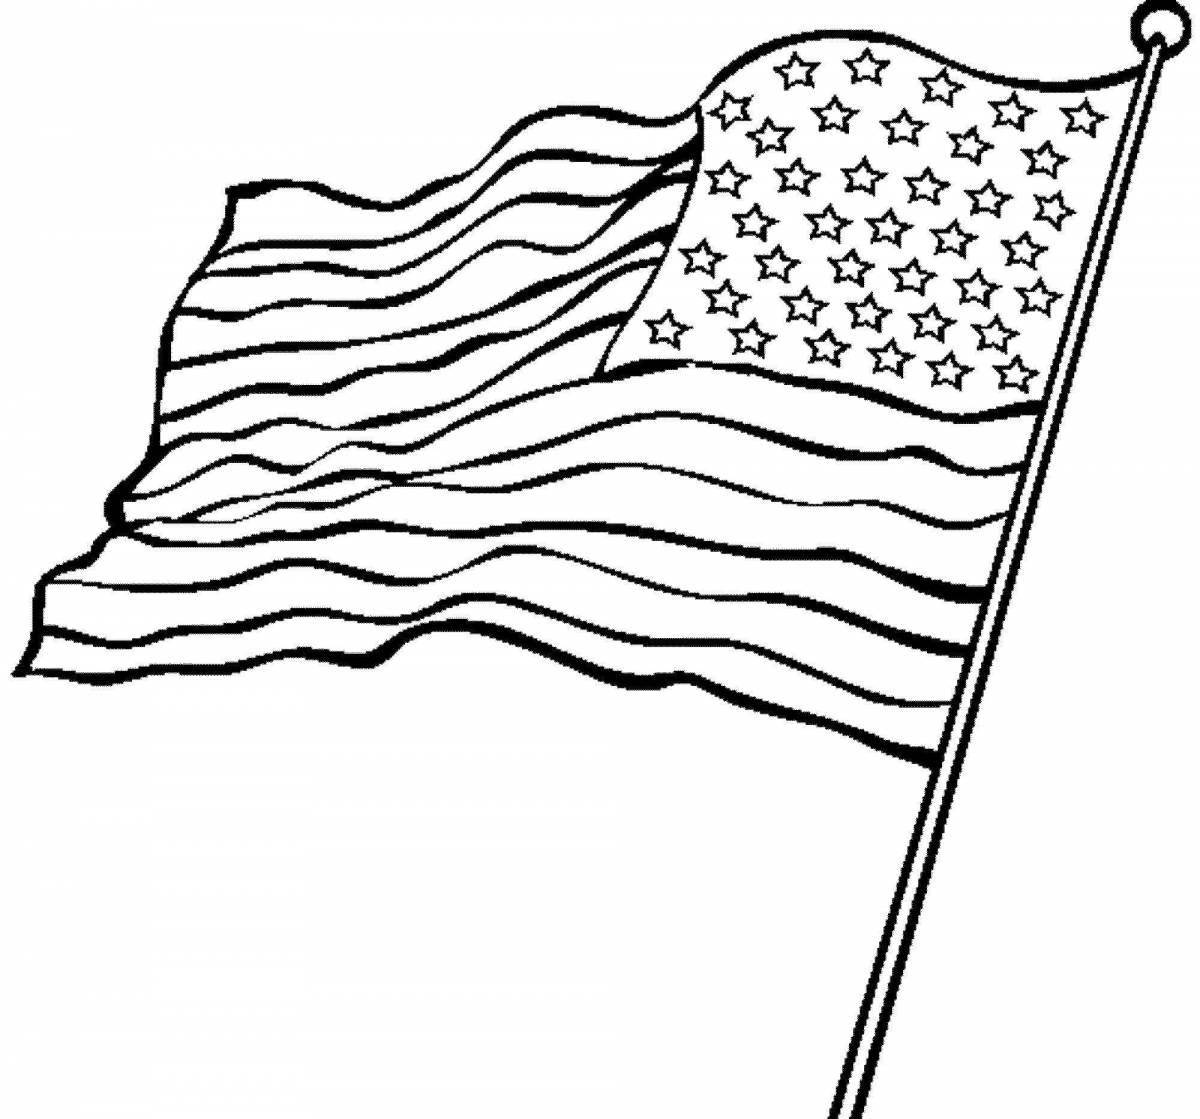 Colorfully detailed American flag coloring page